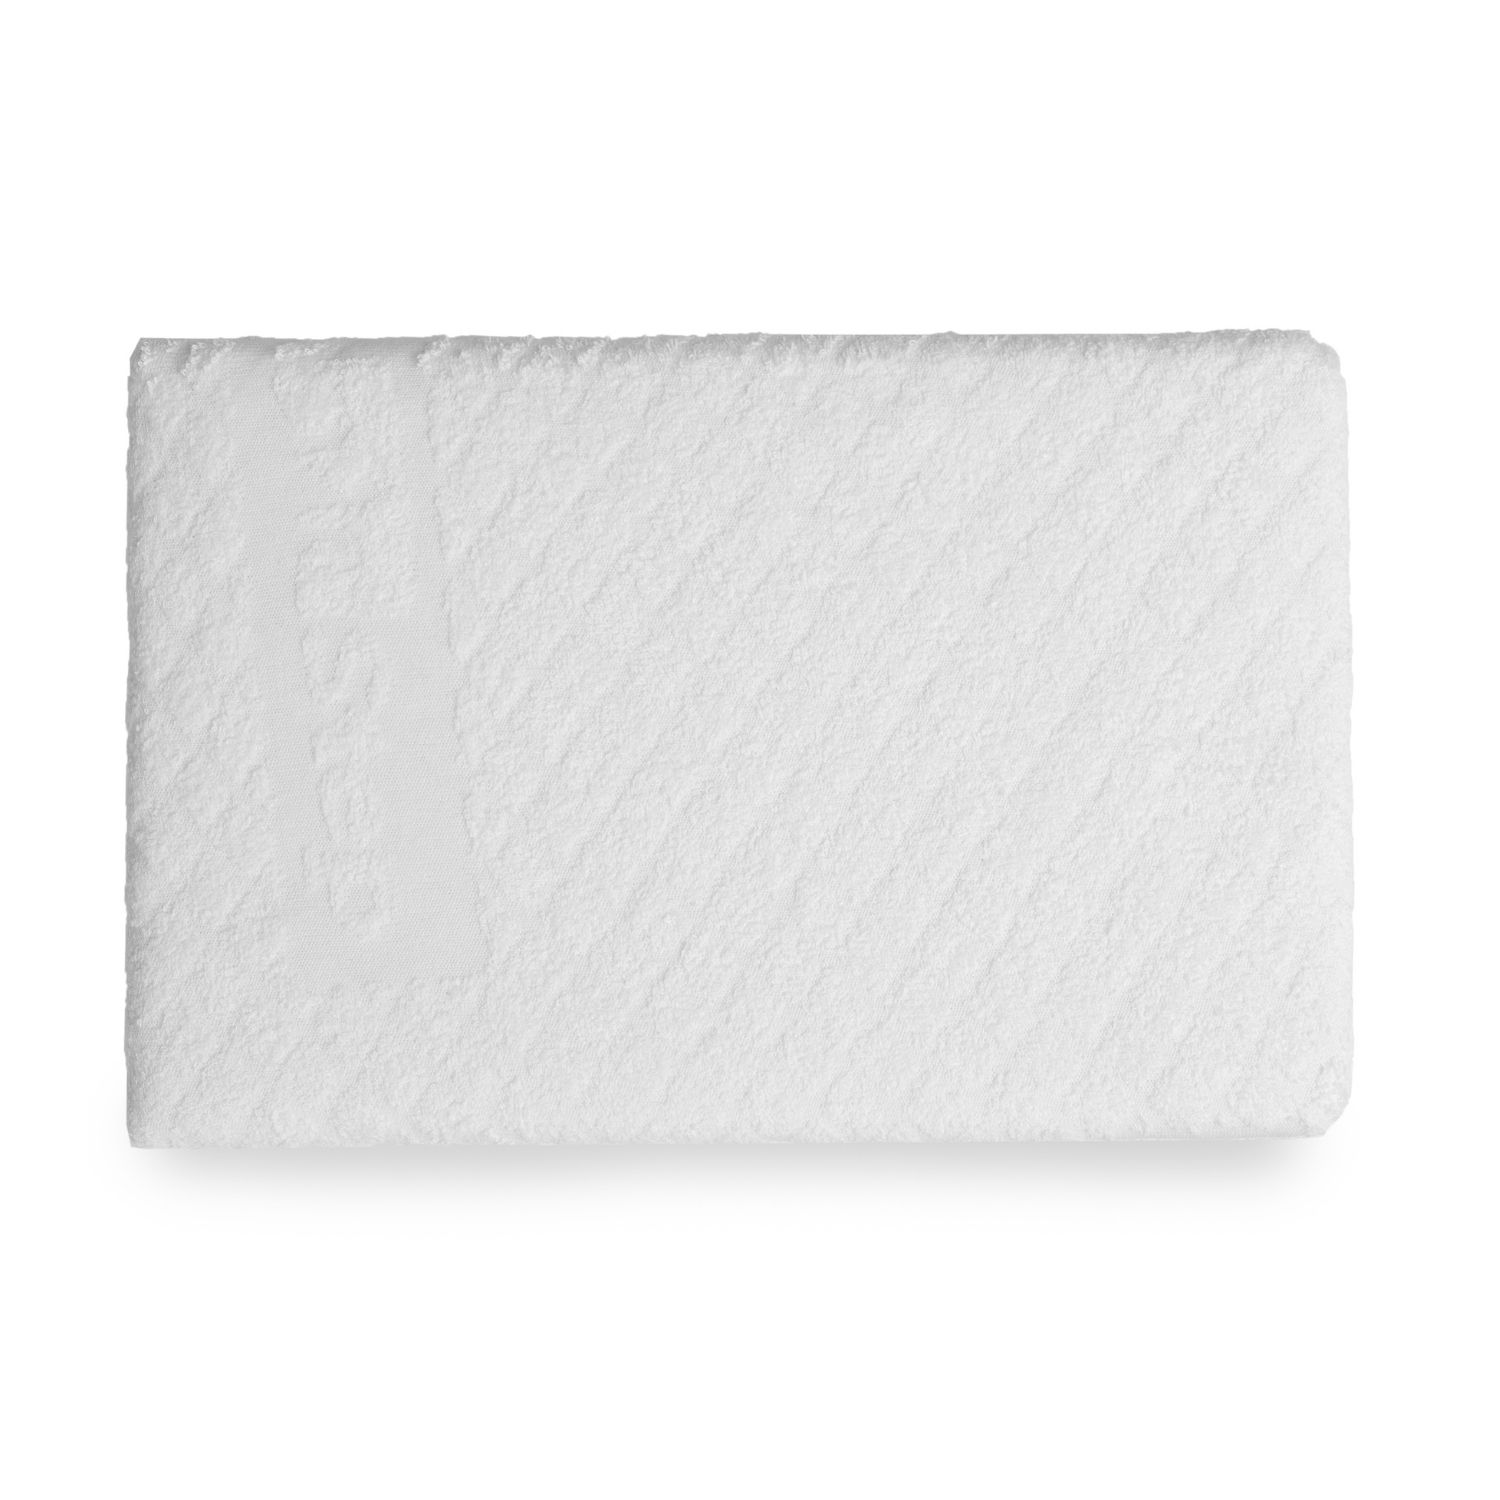 Waterproof Pillow Cases - Vivawhite Care Protect (pair)